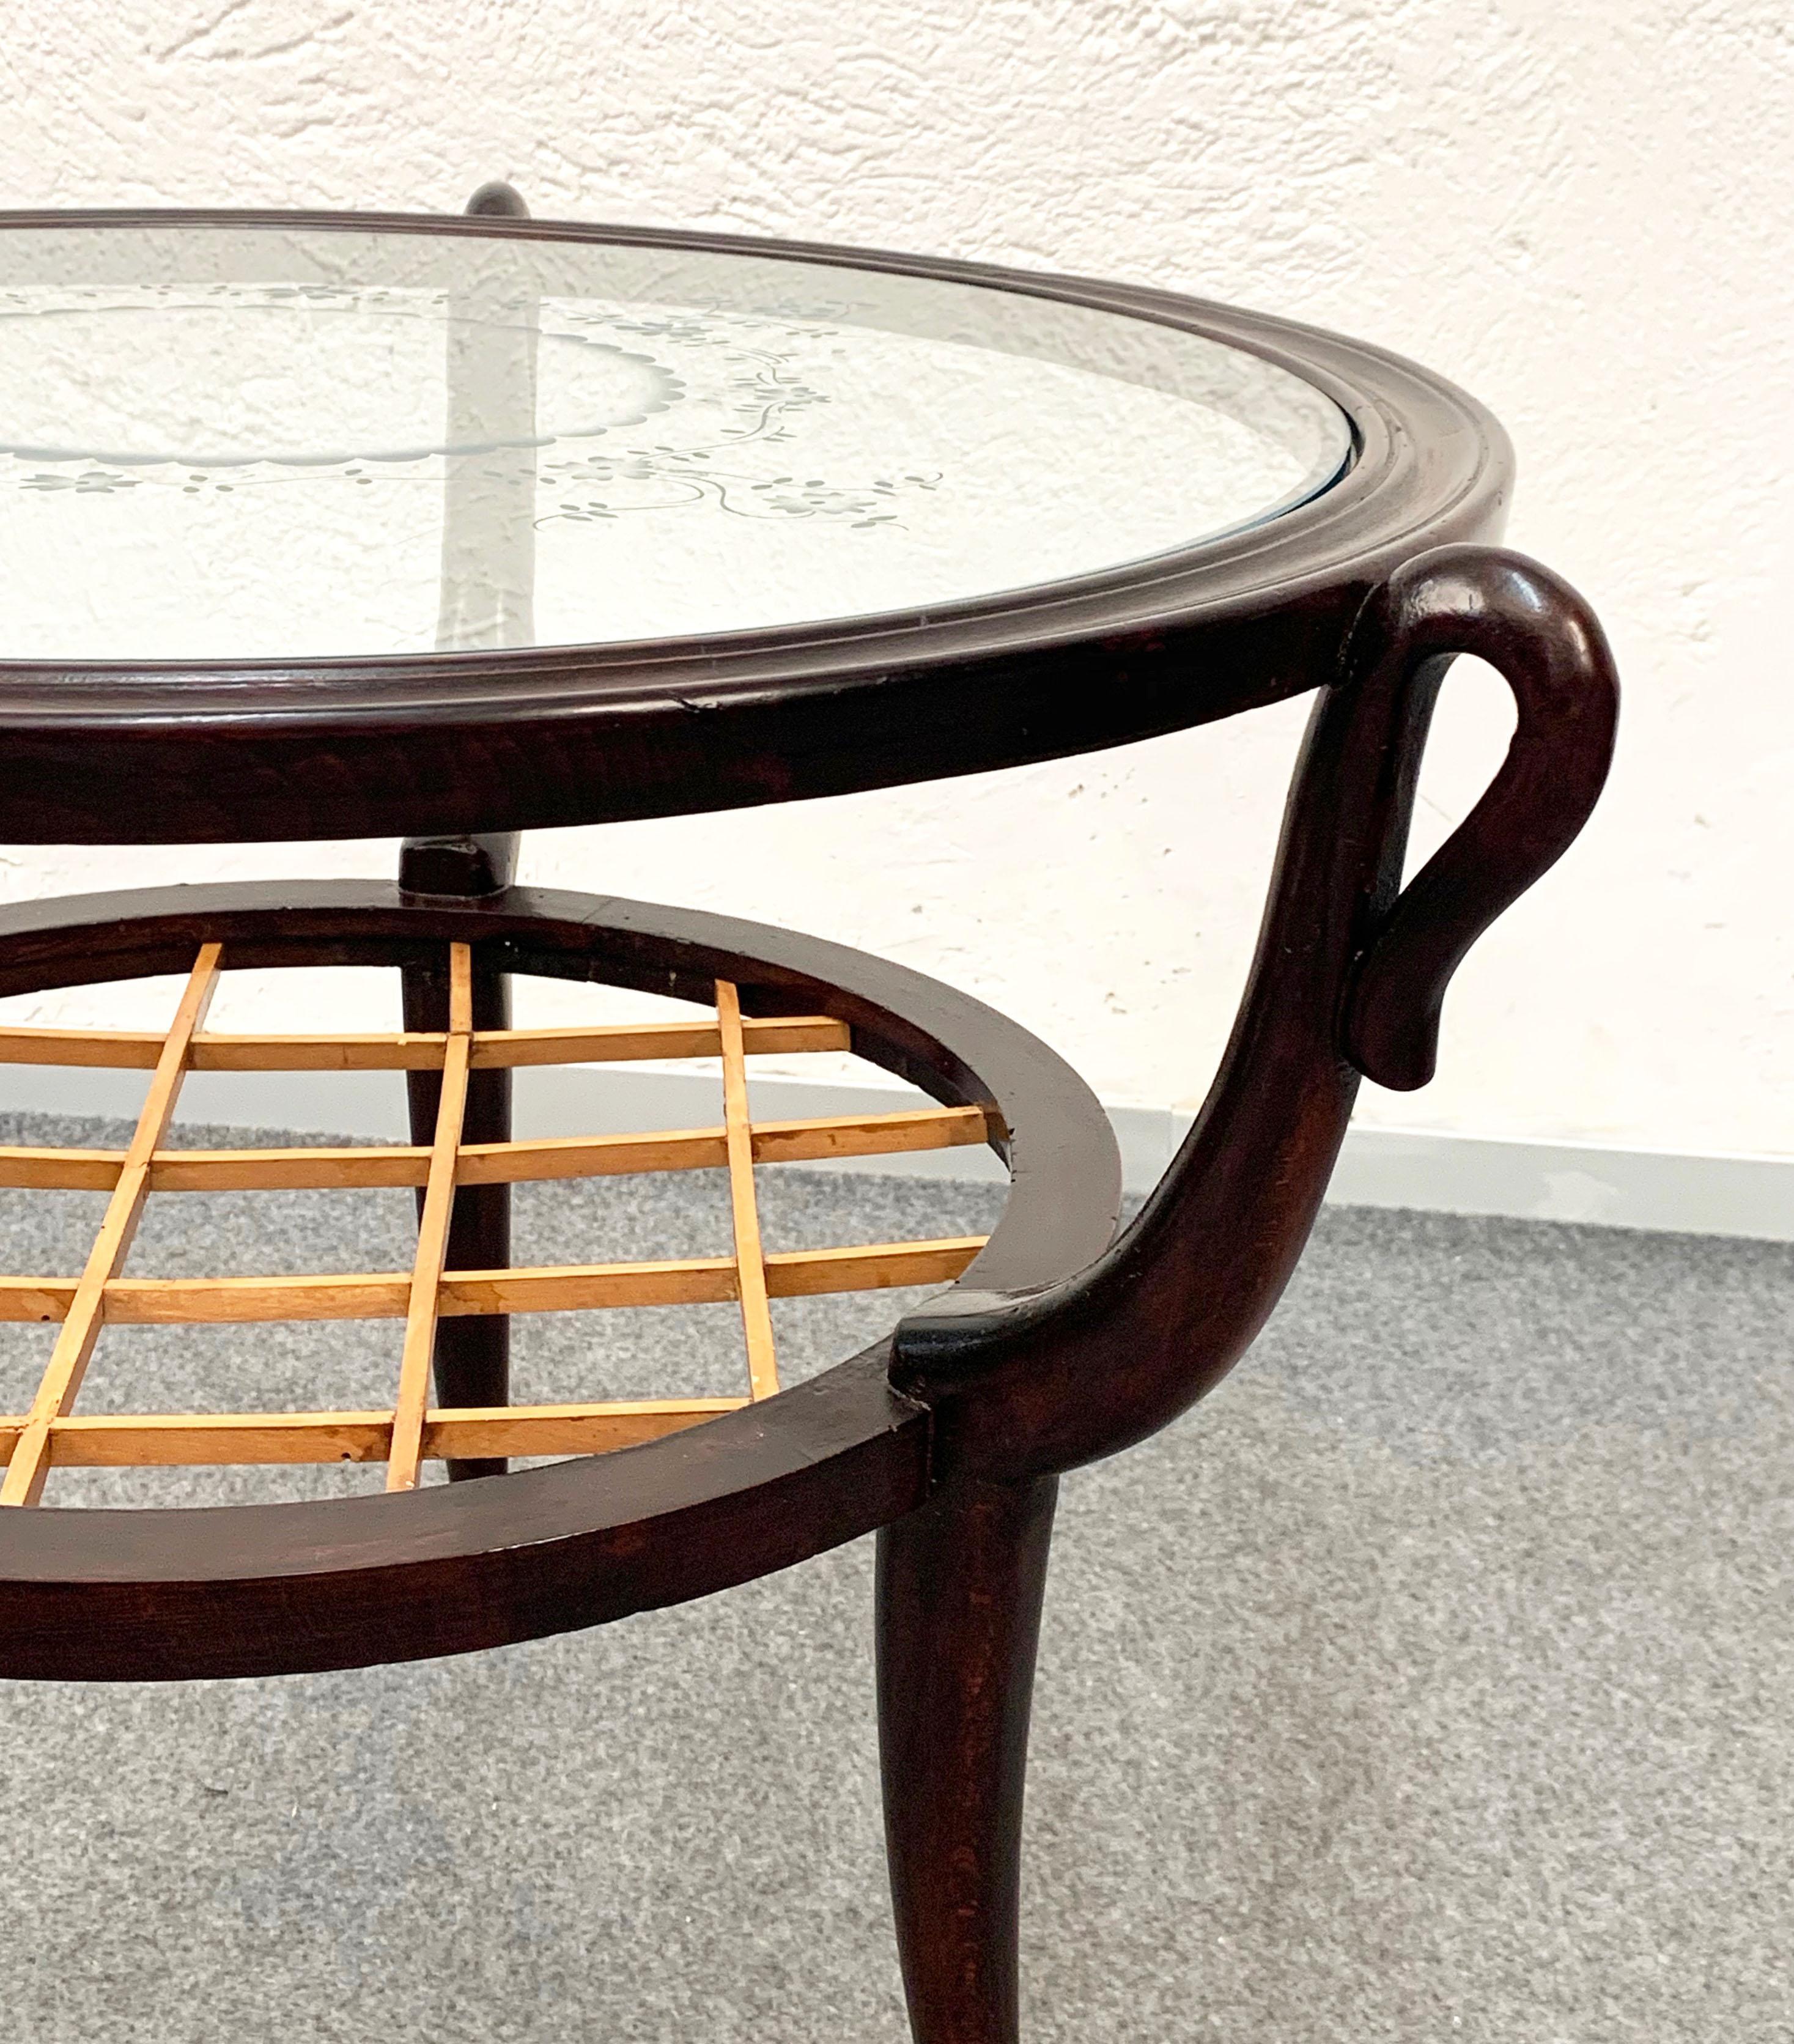 Two-level Round Wood and Glass Italian Coffee Table Gio Ponti Style, 1950s For Sale 7